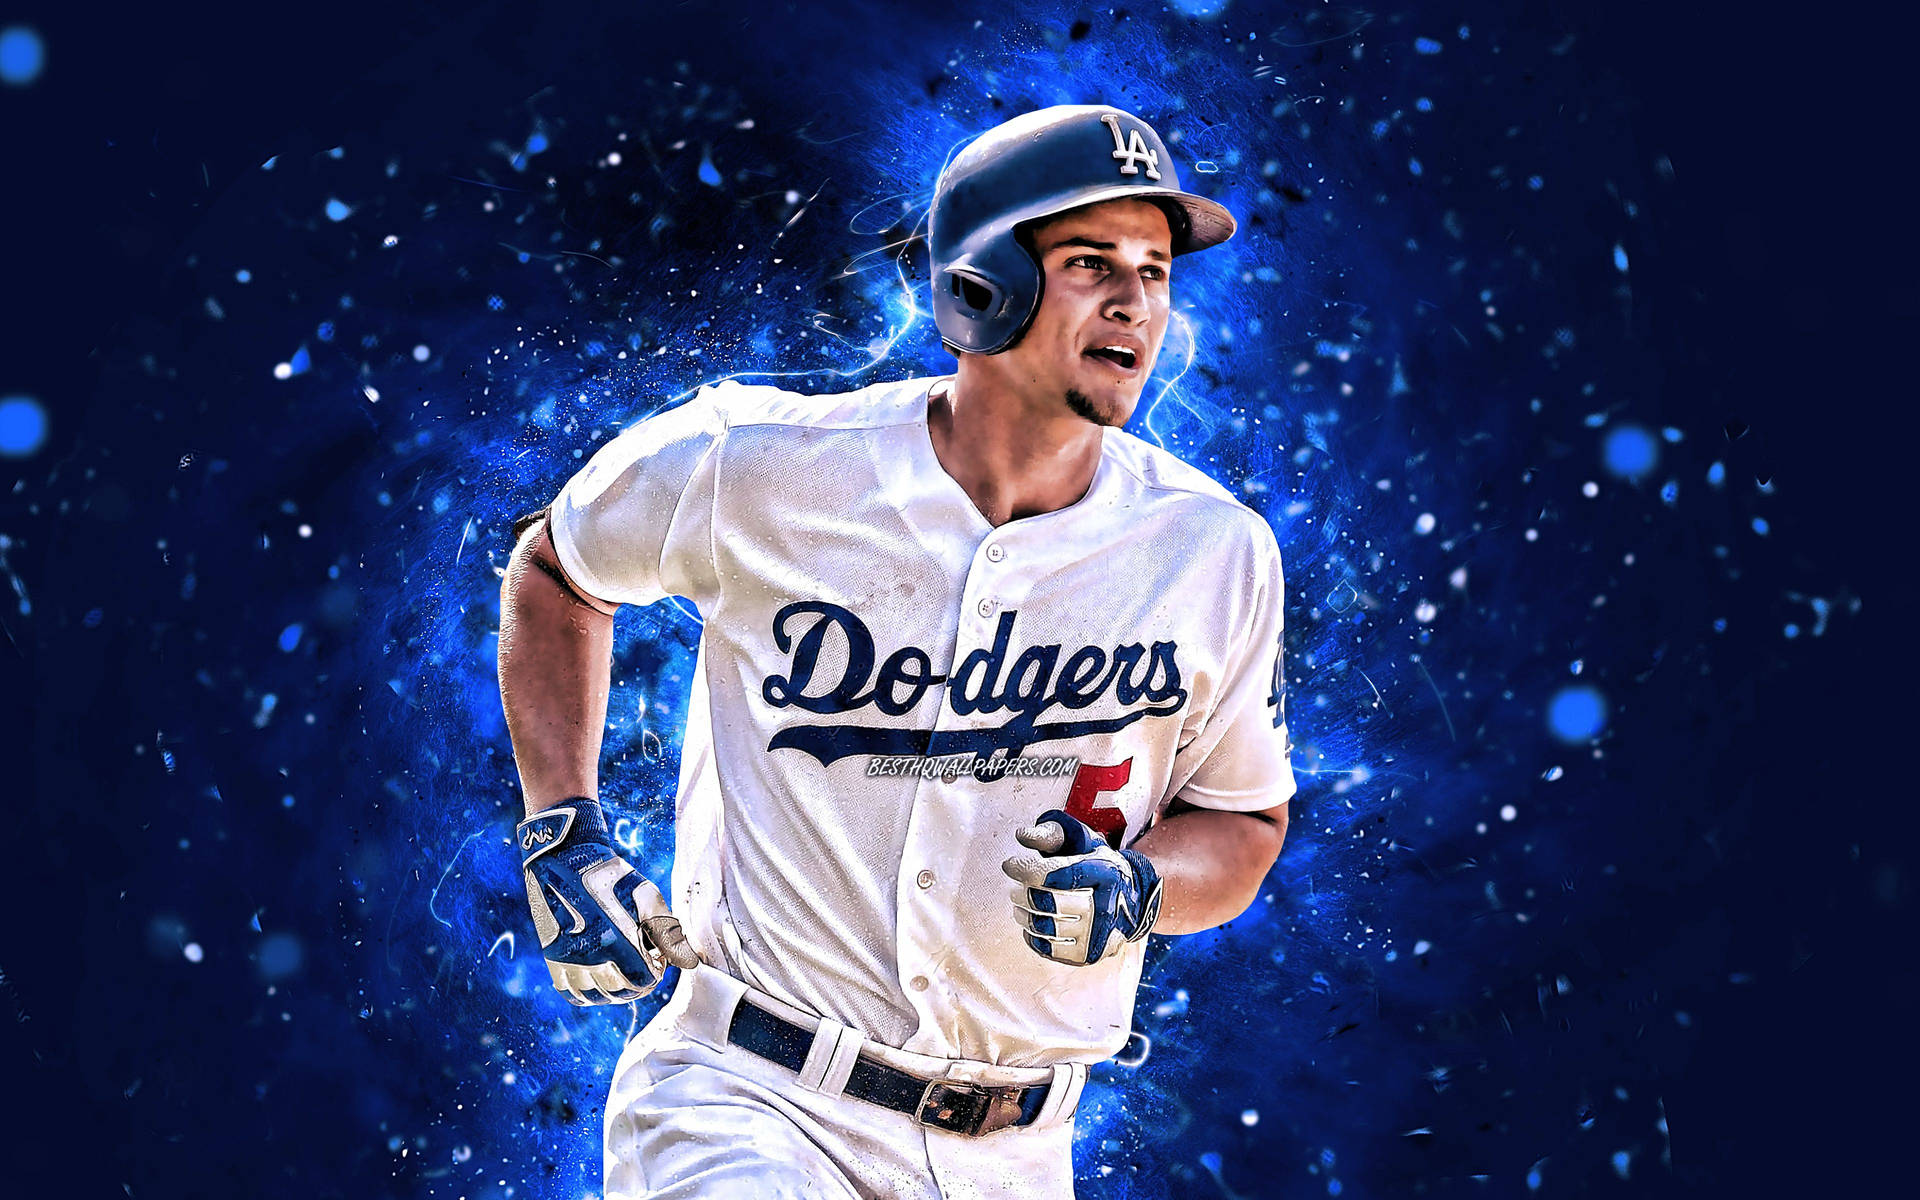 Corey Seager Running With Blue Lights Wallpaper